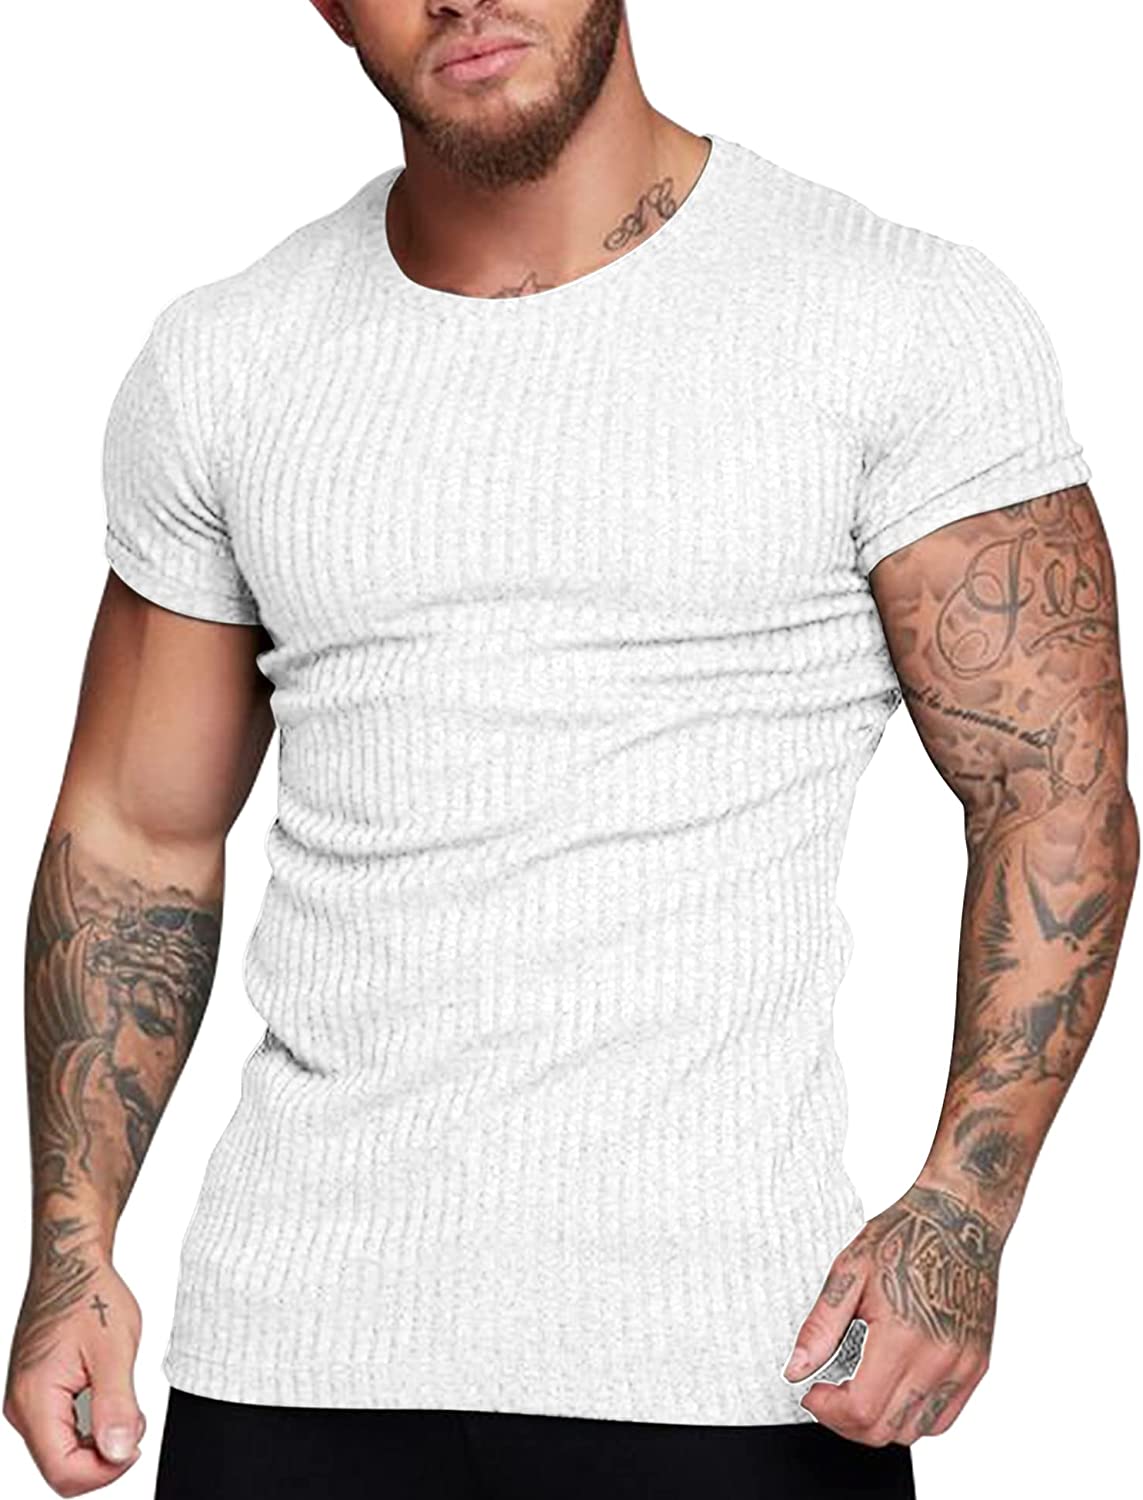 COOFANDY Men's Muscle T Shirts Stretch Short Sleeve V Neck Bodybuilding  Workout Tee Shirts